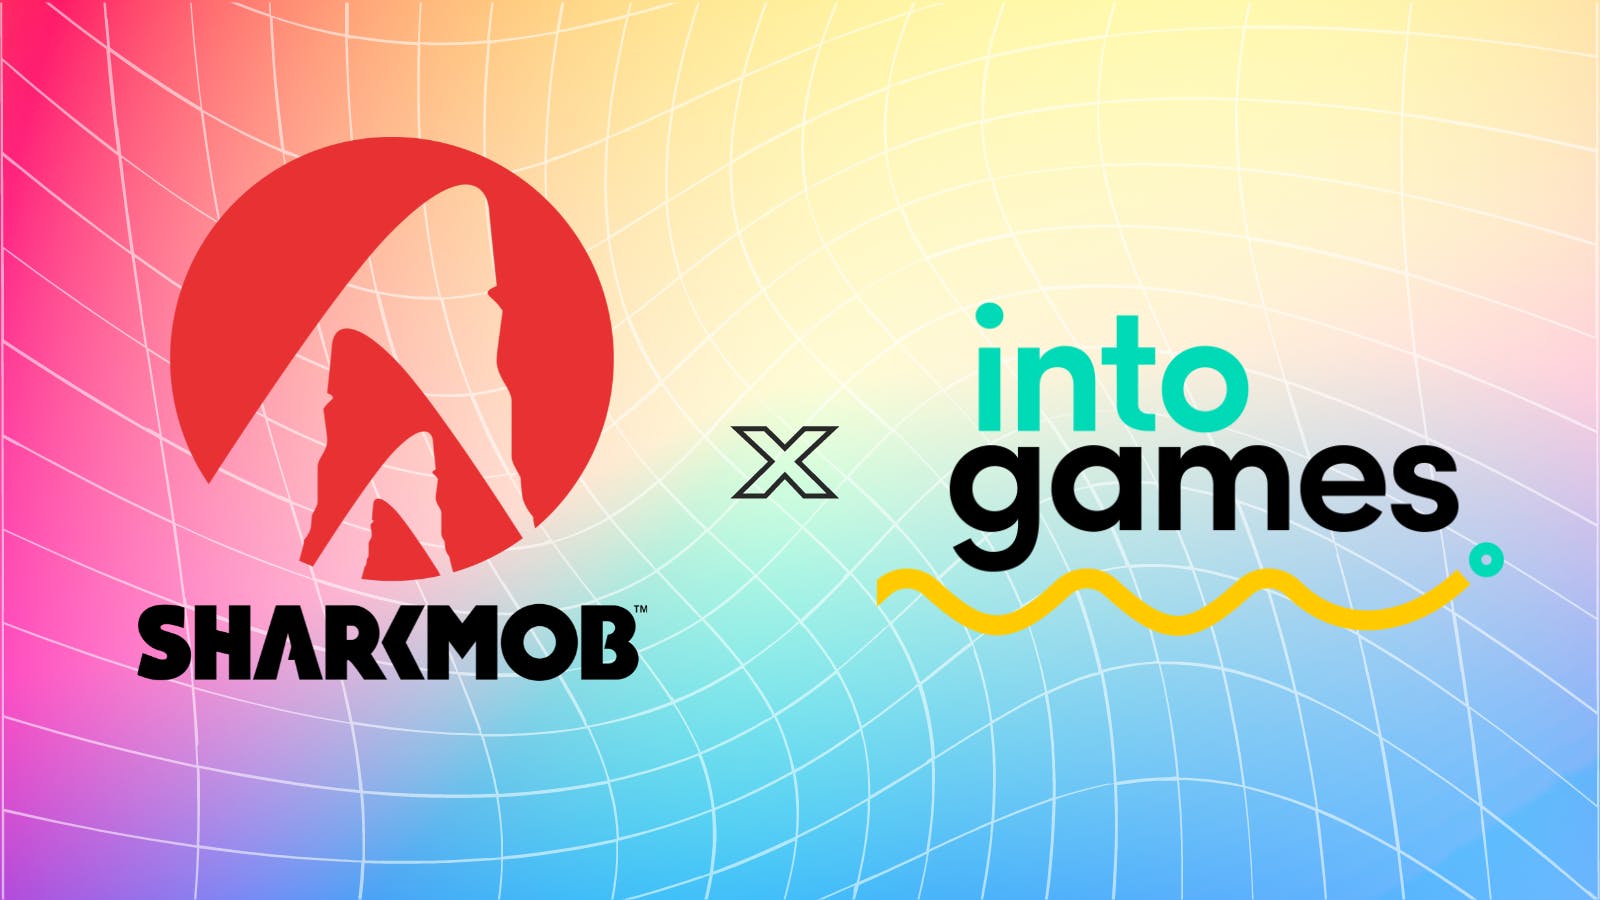 Sharkmob are joining as Into Games Industry Partners